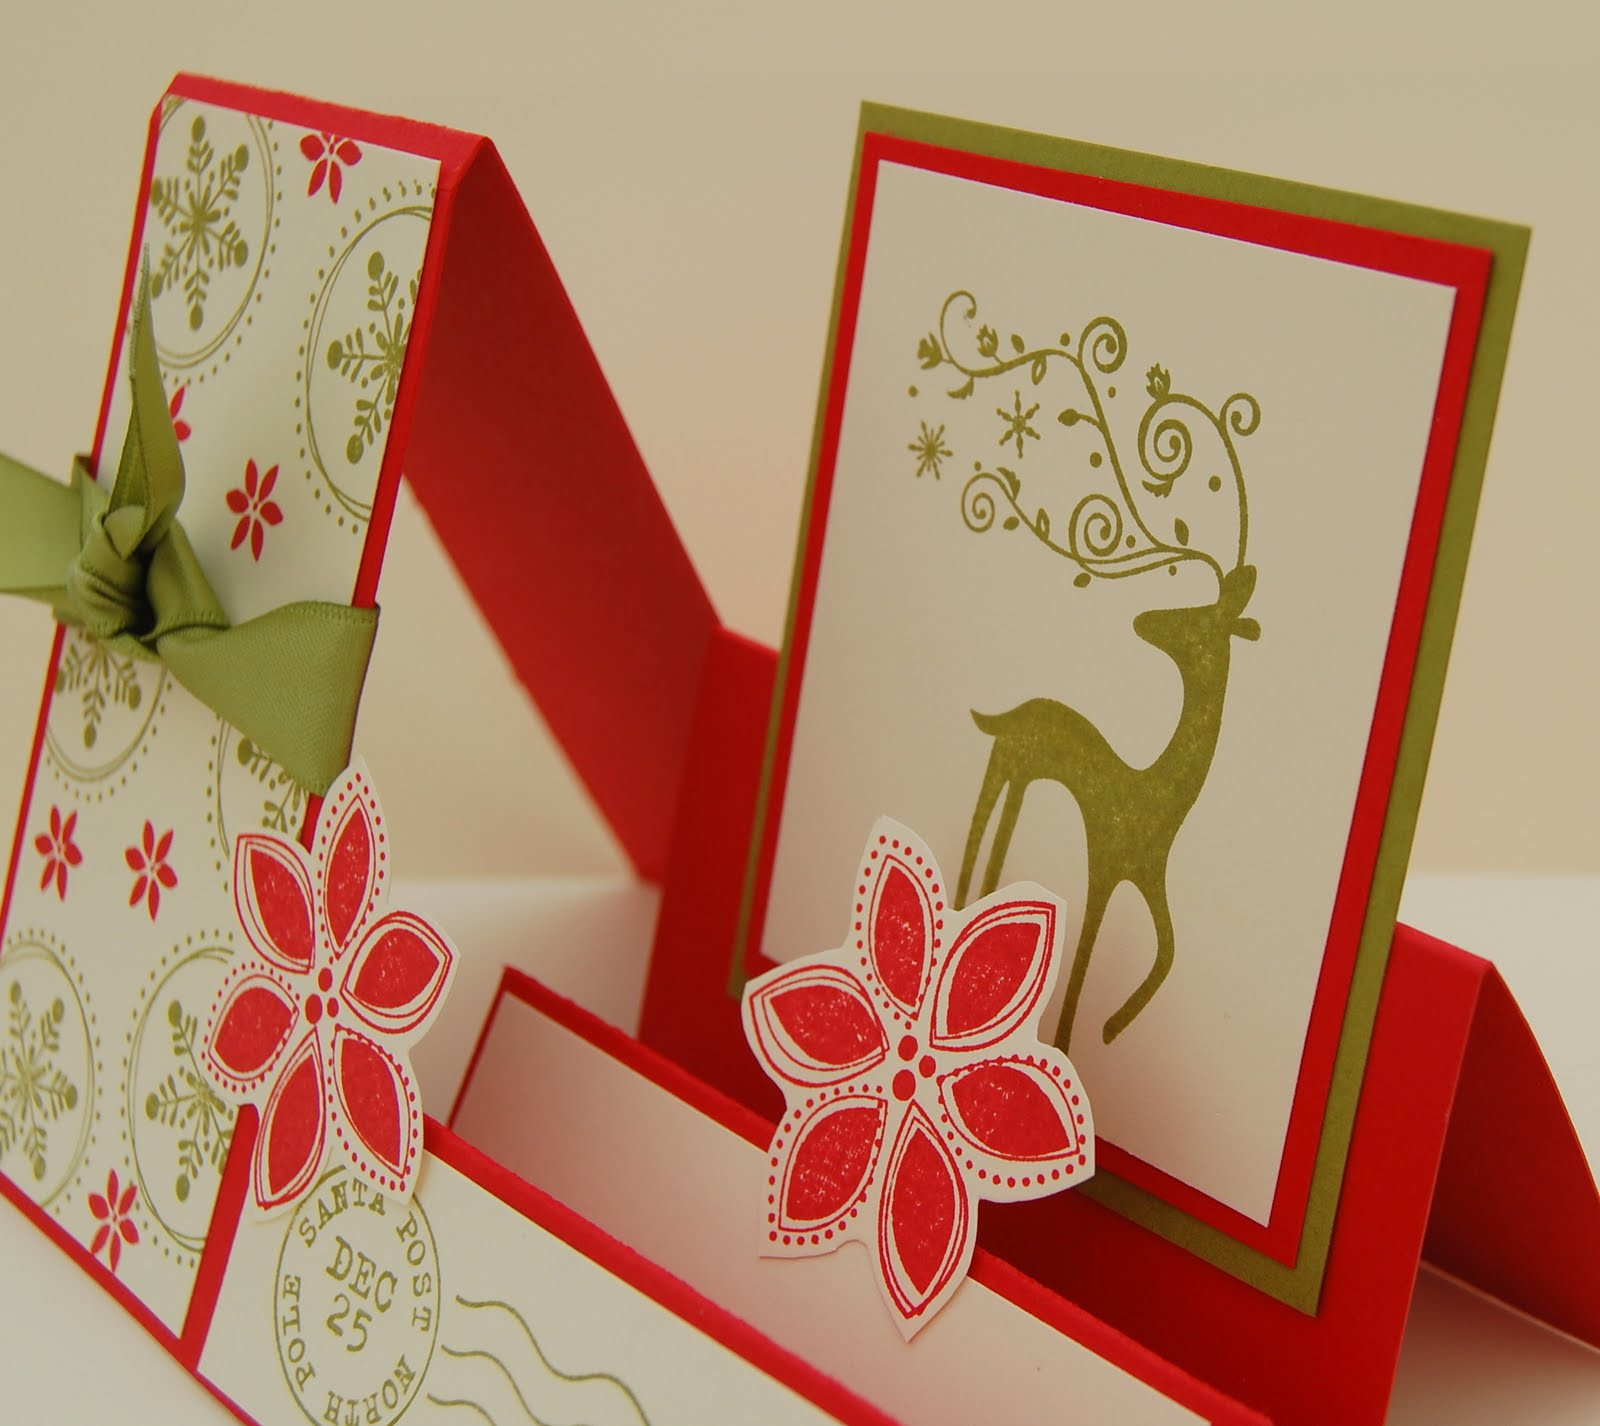 Stampinup Christmas Card Ideas
 CRAFTY RED Stampin Up Christmas cards